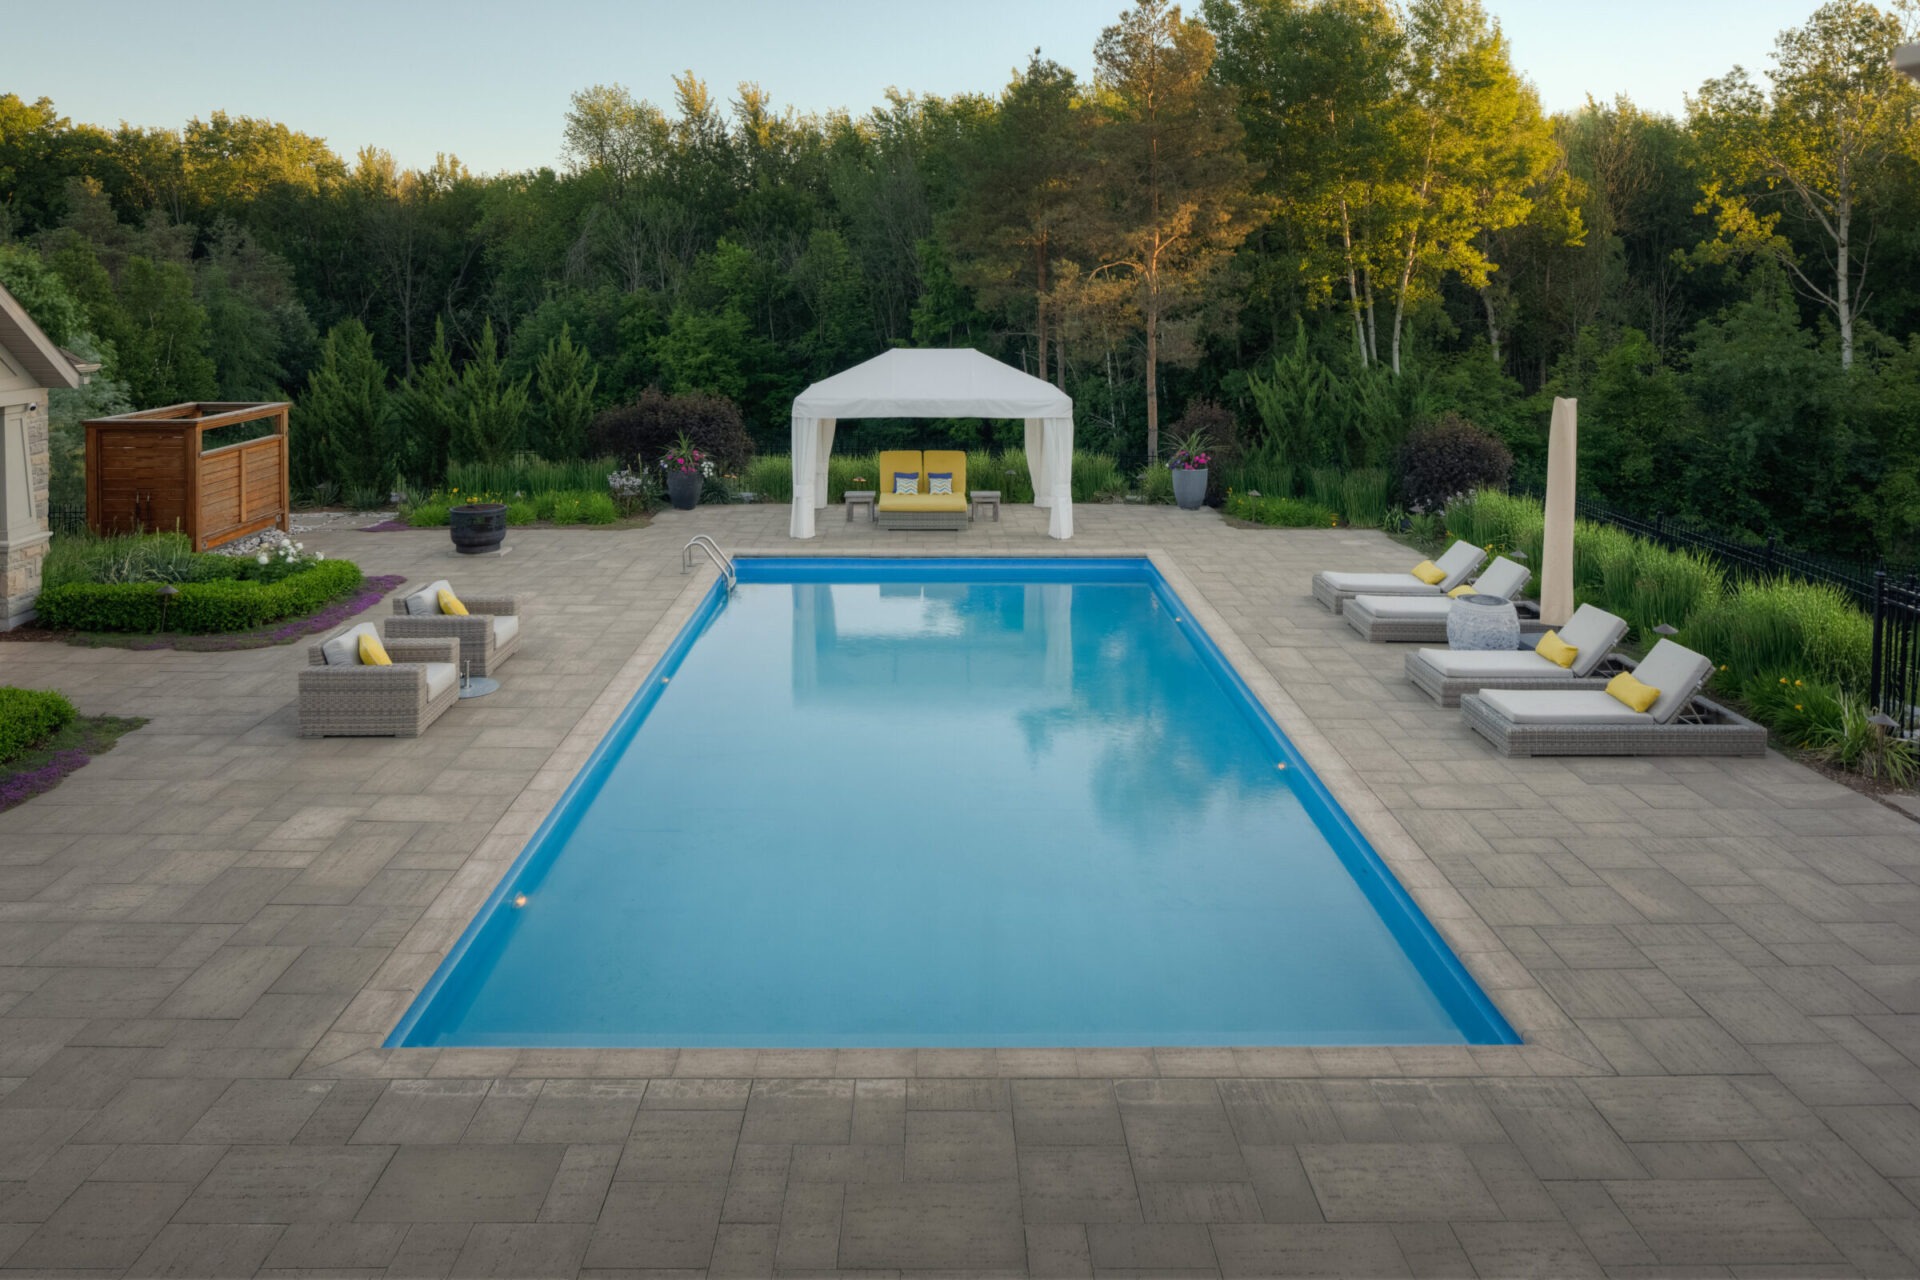 An inviting outdoor swimming pool with loungers, a white canopy, and a surrounding patio set within a lush landscape during the early evening.